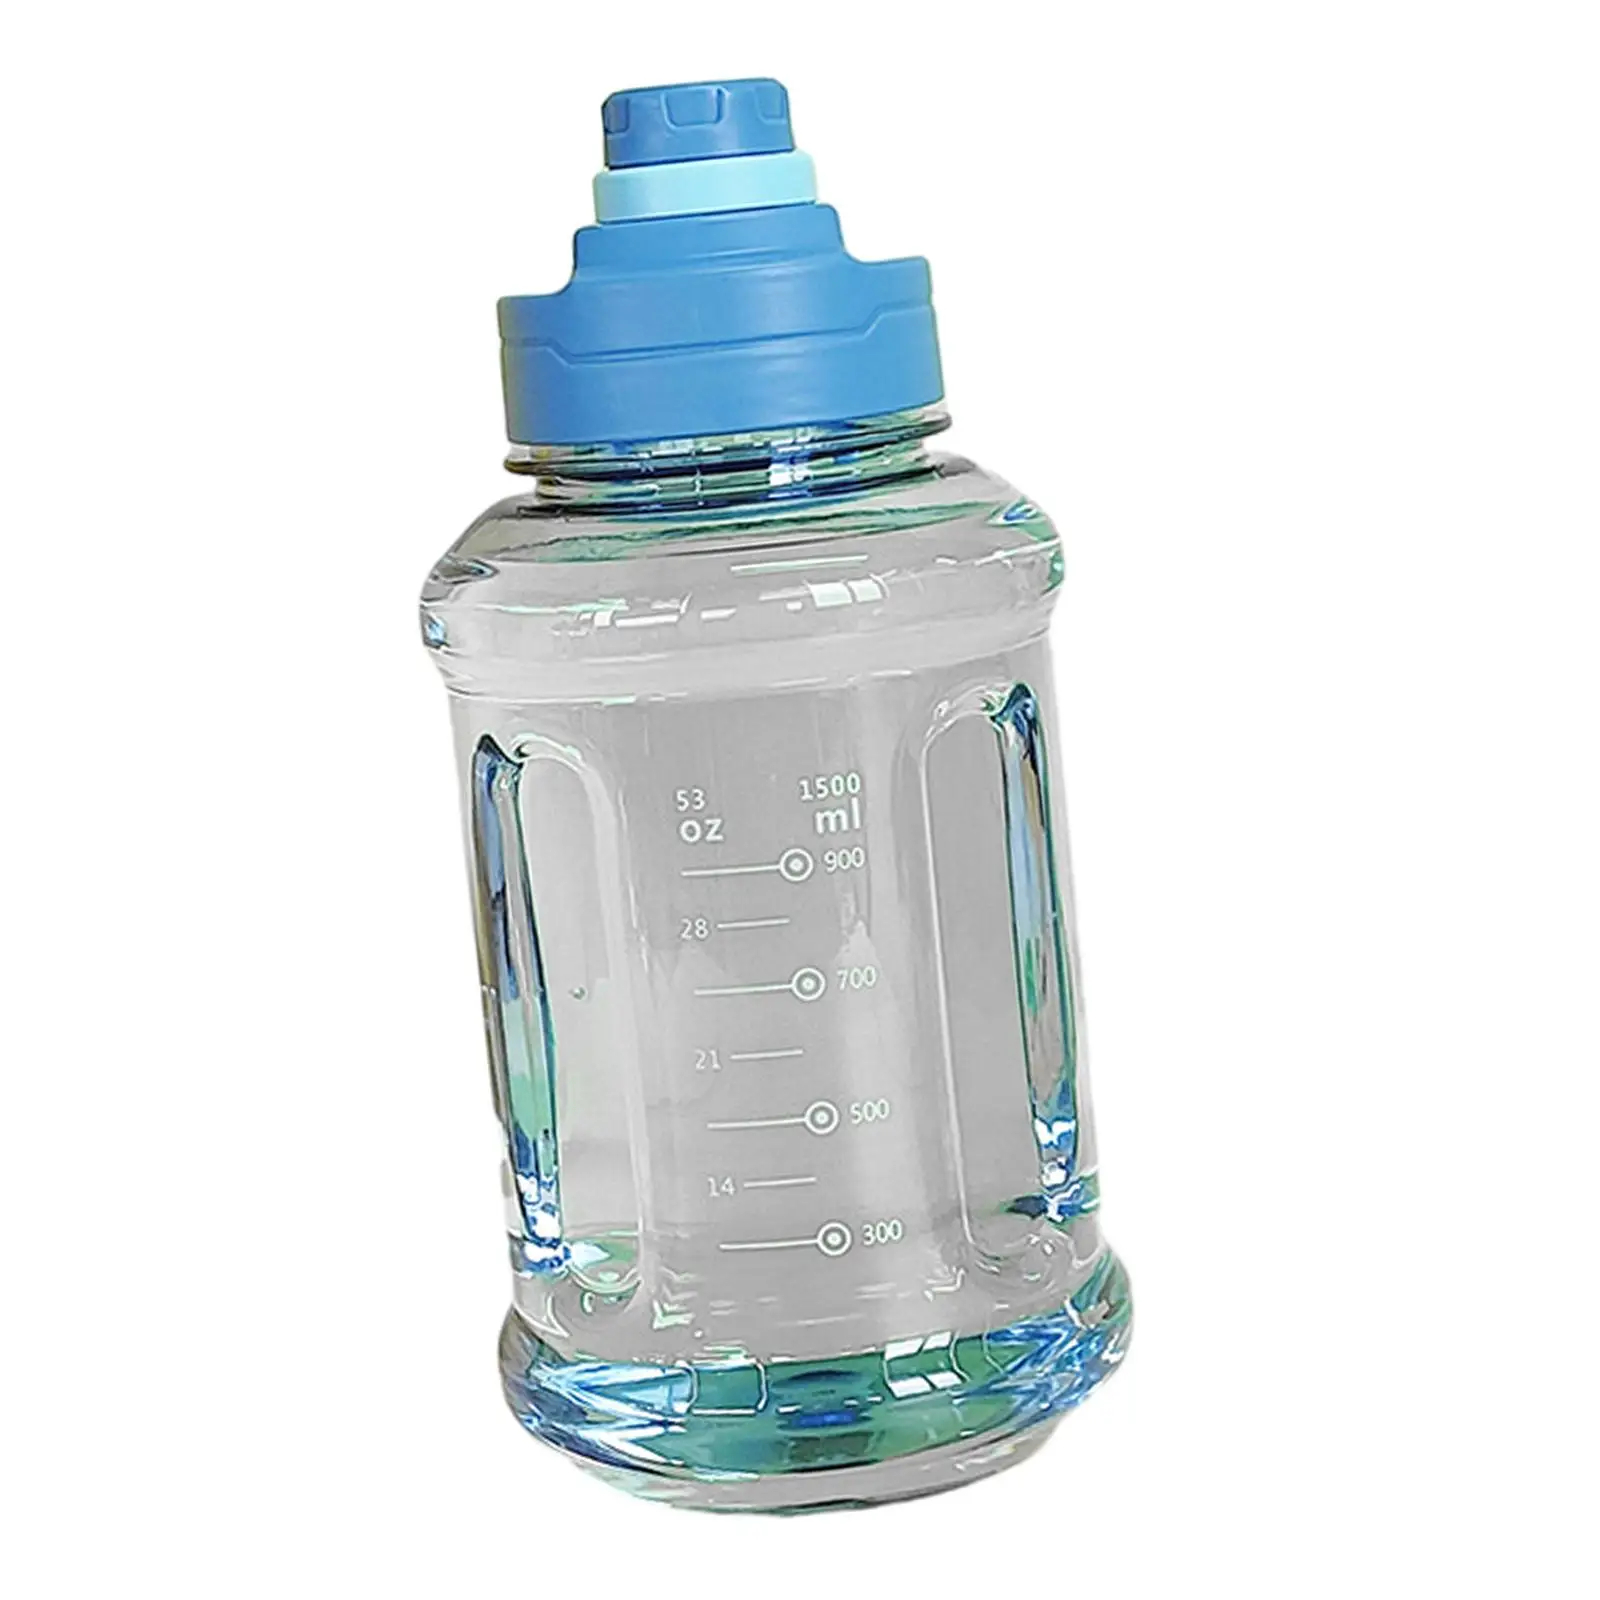 Gym Water Bottle Sports Water Bottle 1.5L Easy to Use for Sports and Travel Large Capacity Big Water Bottle Bottle